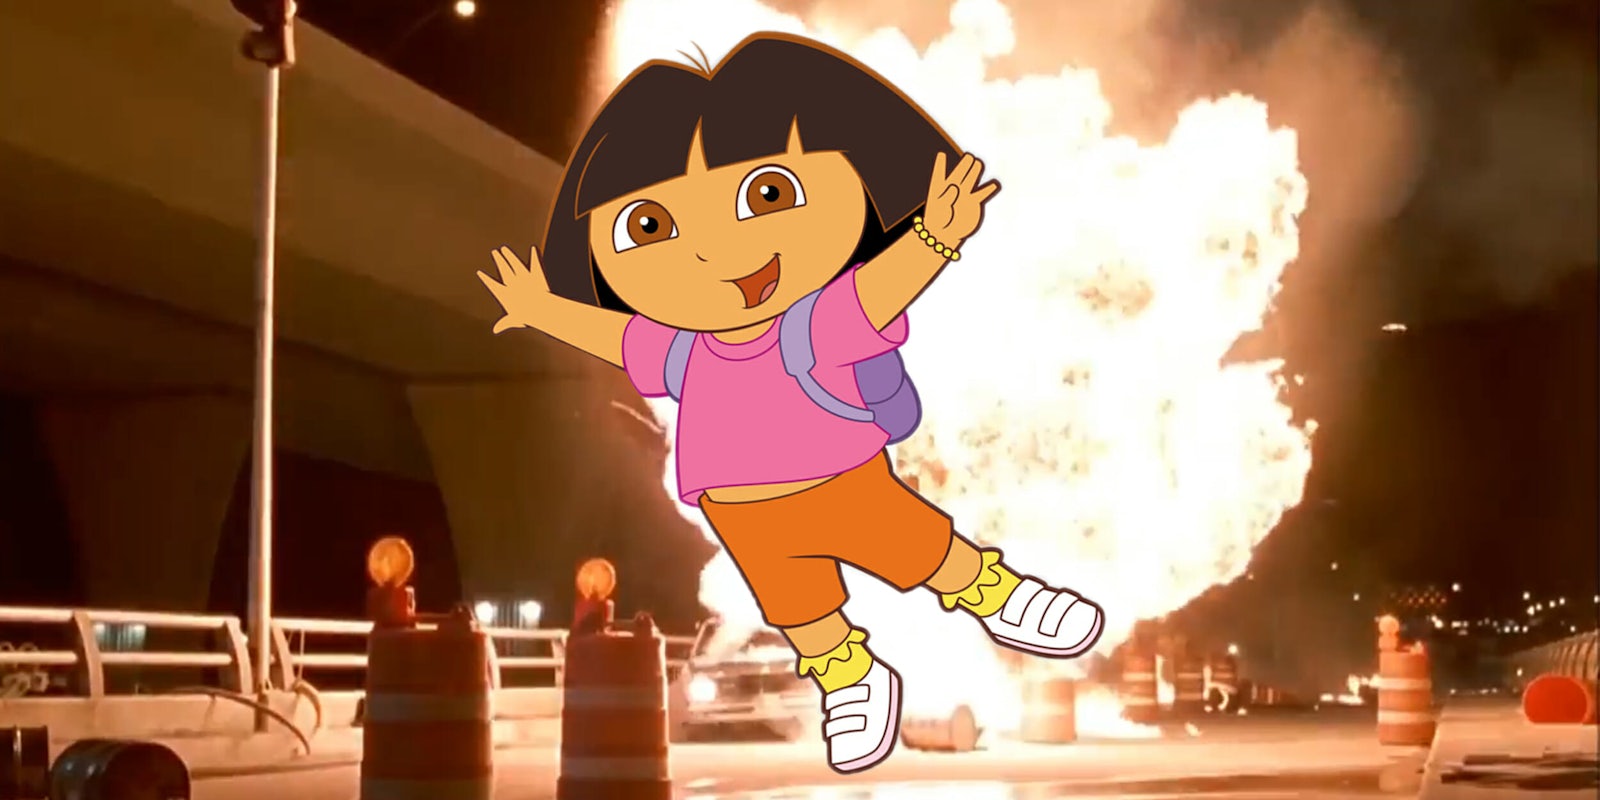 Dora the Explorer leaps away from explosion